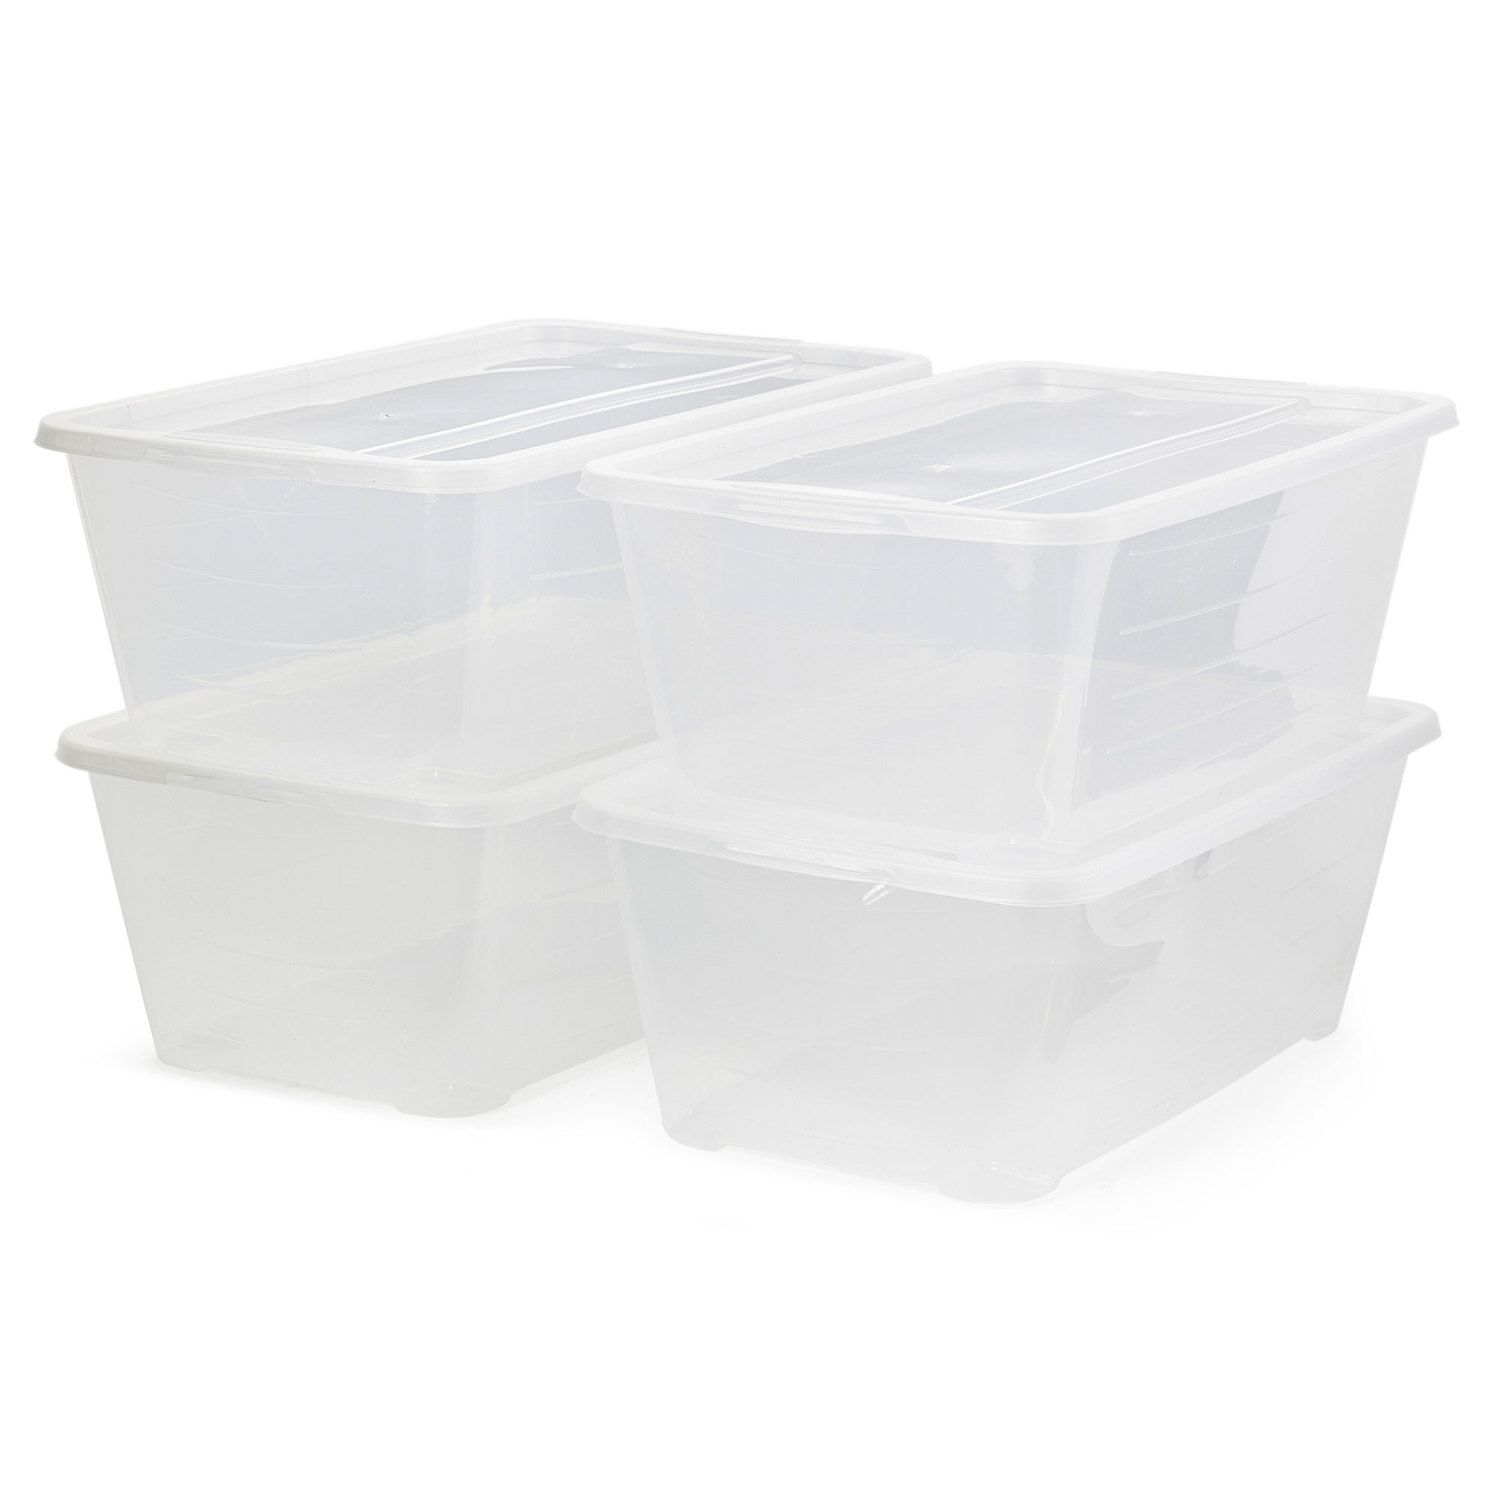 Life Story 5.7 Liter Clear Shoe/Closet Storage Box Stacking